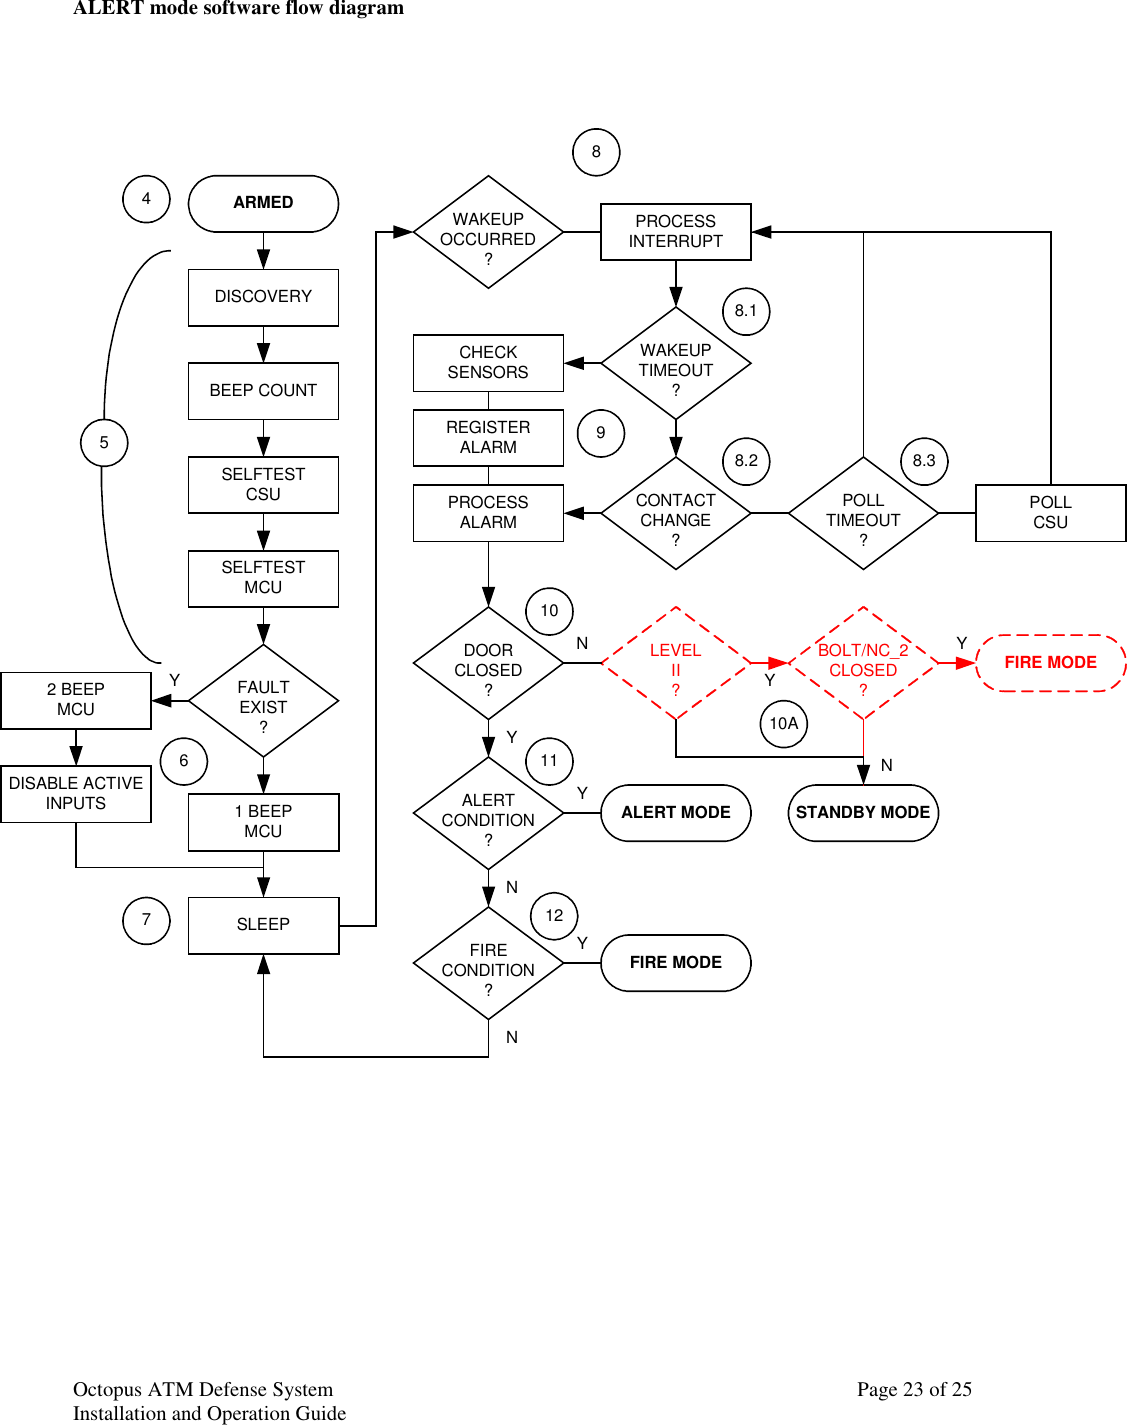 Octopus ATM Defense SystemInstallation and Operation Guide Page 23 of 25ALERT mode software flow diagramARMEDDISCOVERYSELFTESTCSUSELFTESTMCUBEEP COUNTDOORCLOSED?BOLT/NC_2CLOSED?FAULTEXIST?1 BEEPMCU2 BEEPMCUYNLEVELII?STANDBY MODEYY FIRE MODEYNALERTCONDITION?FIRECONDITION?POLLTIMEOUT?ALERT MODEFIRE MODEPOLLCSUSLEEPDISABLE ACTIVEINPUTSWAKEUPOCCURRED?WAKEUPTIMEOUT?CONTACTCHANGE?PROCESSINTERRUPTREGISTERALARMPROCESSALARMCHECKSENSORS4567898.18.2 8.310111210AYNYN